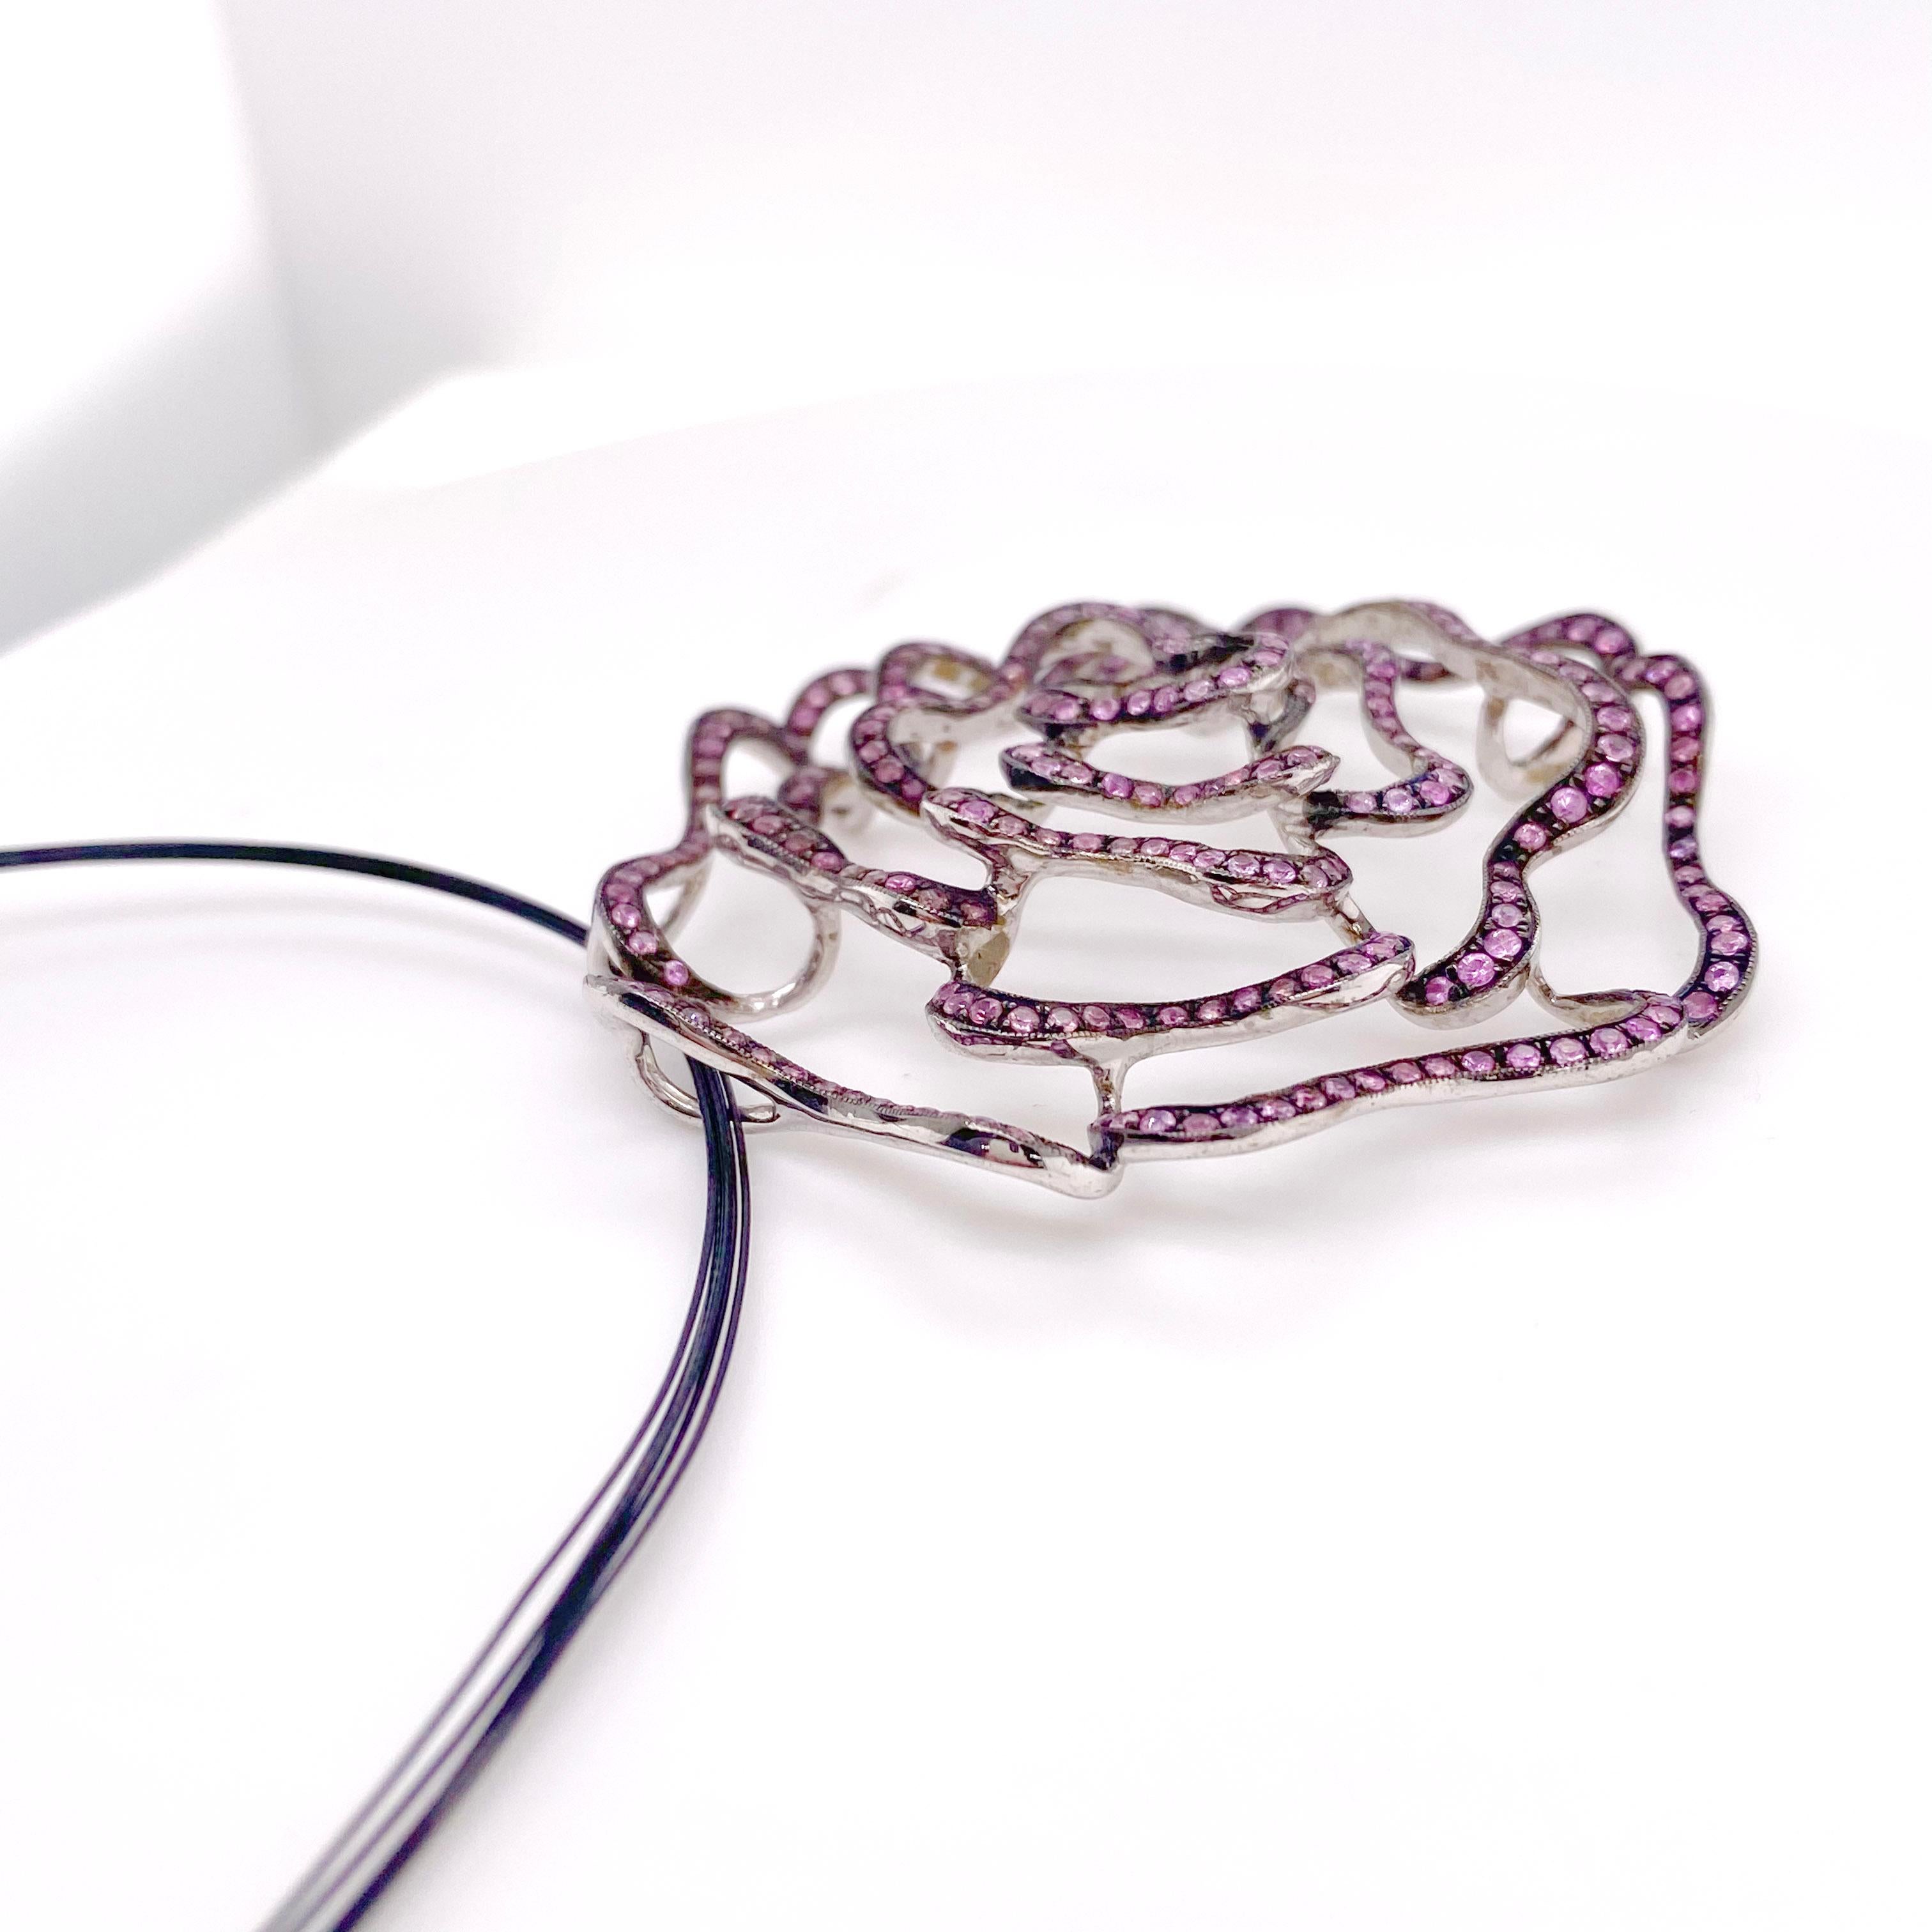 This necklace adds a beautiful statement to your outfit. The pink Sapphires against the oxidized sterling silver makes for a very complimentary contrast. A piece of jewelry great for any season! The details for this beautiful necklace are listed